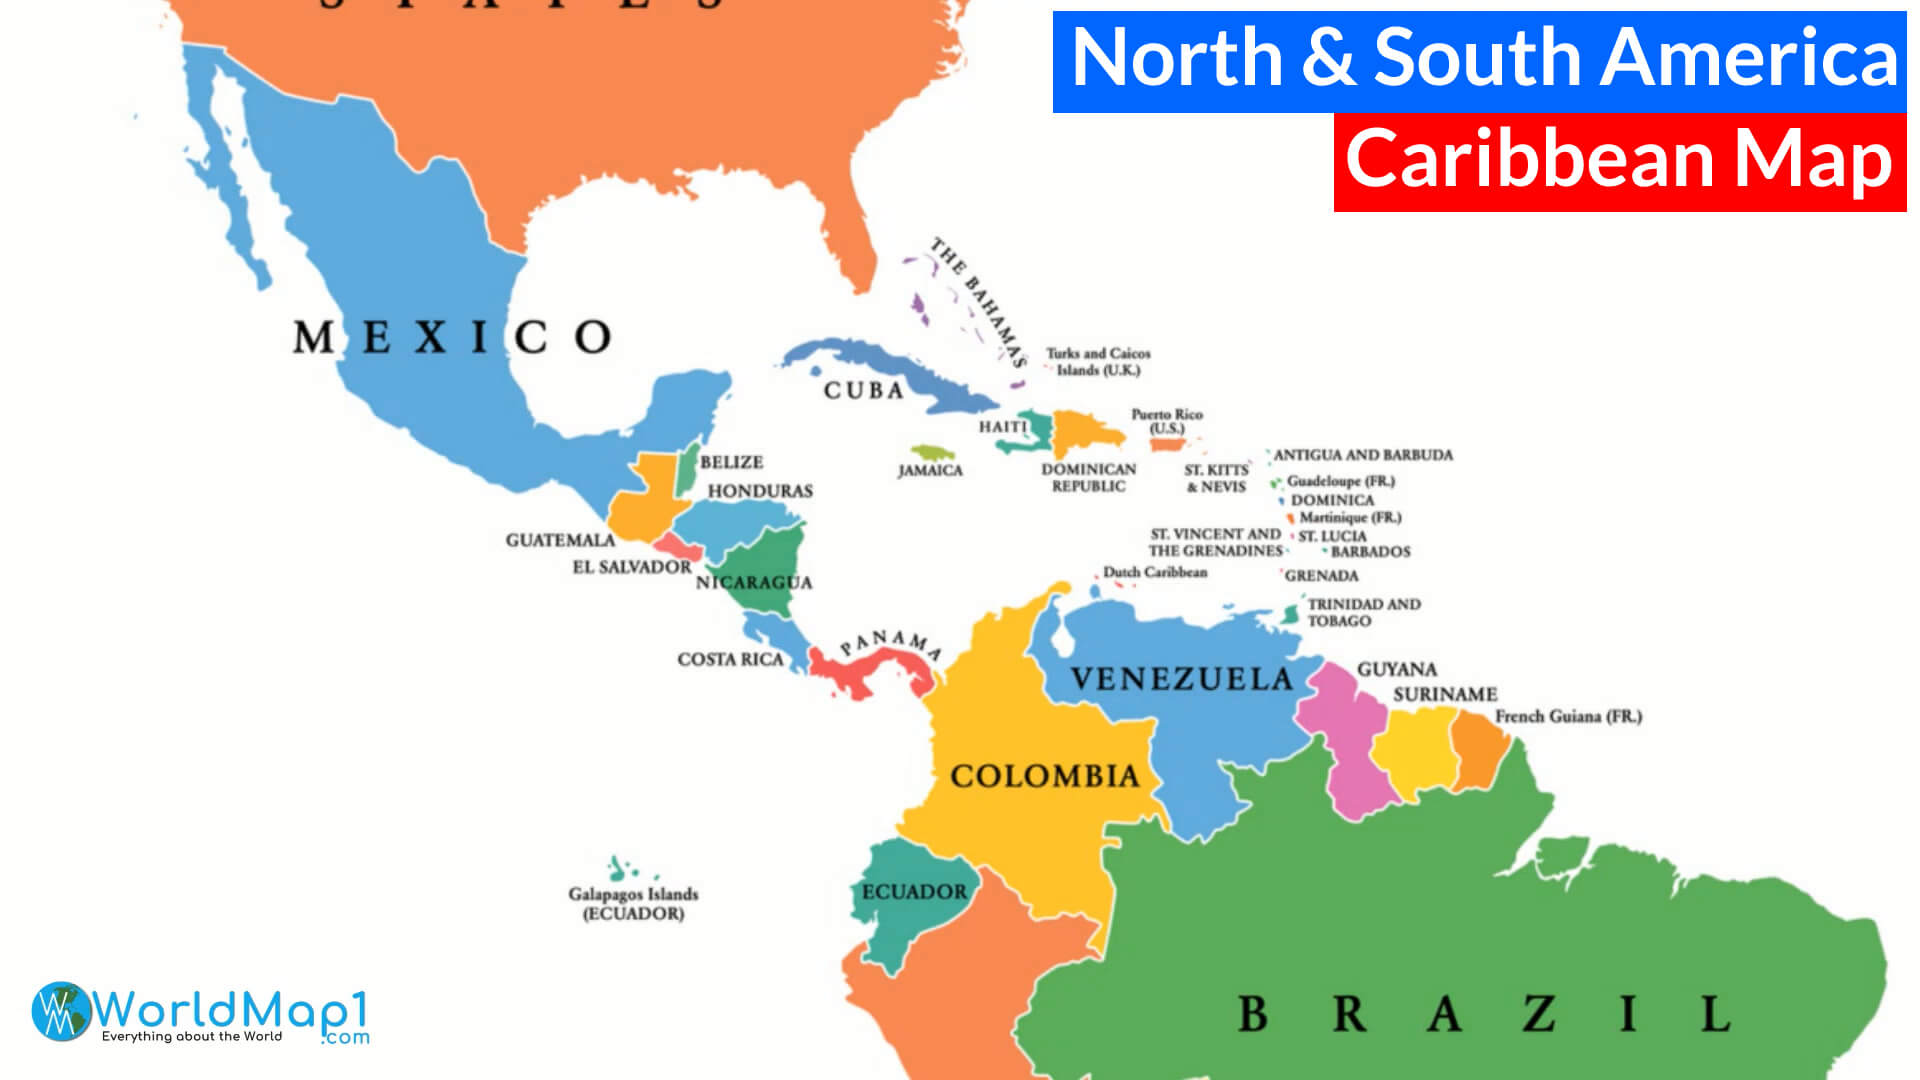 North America and Caribbean Map